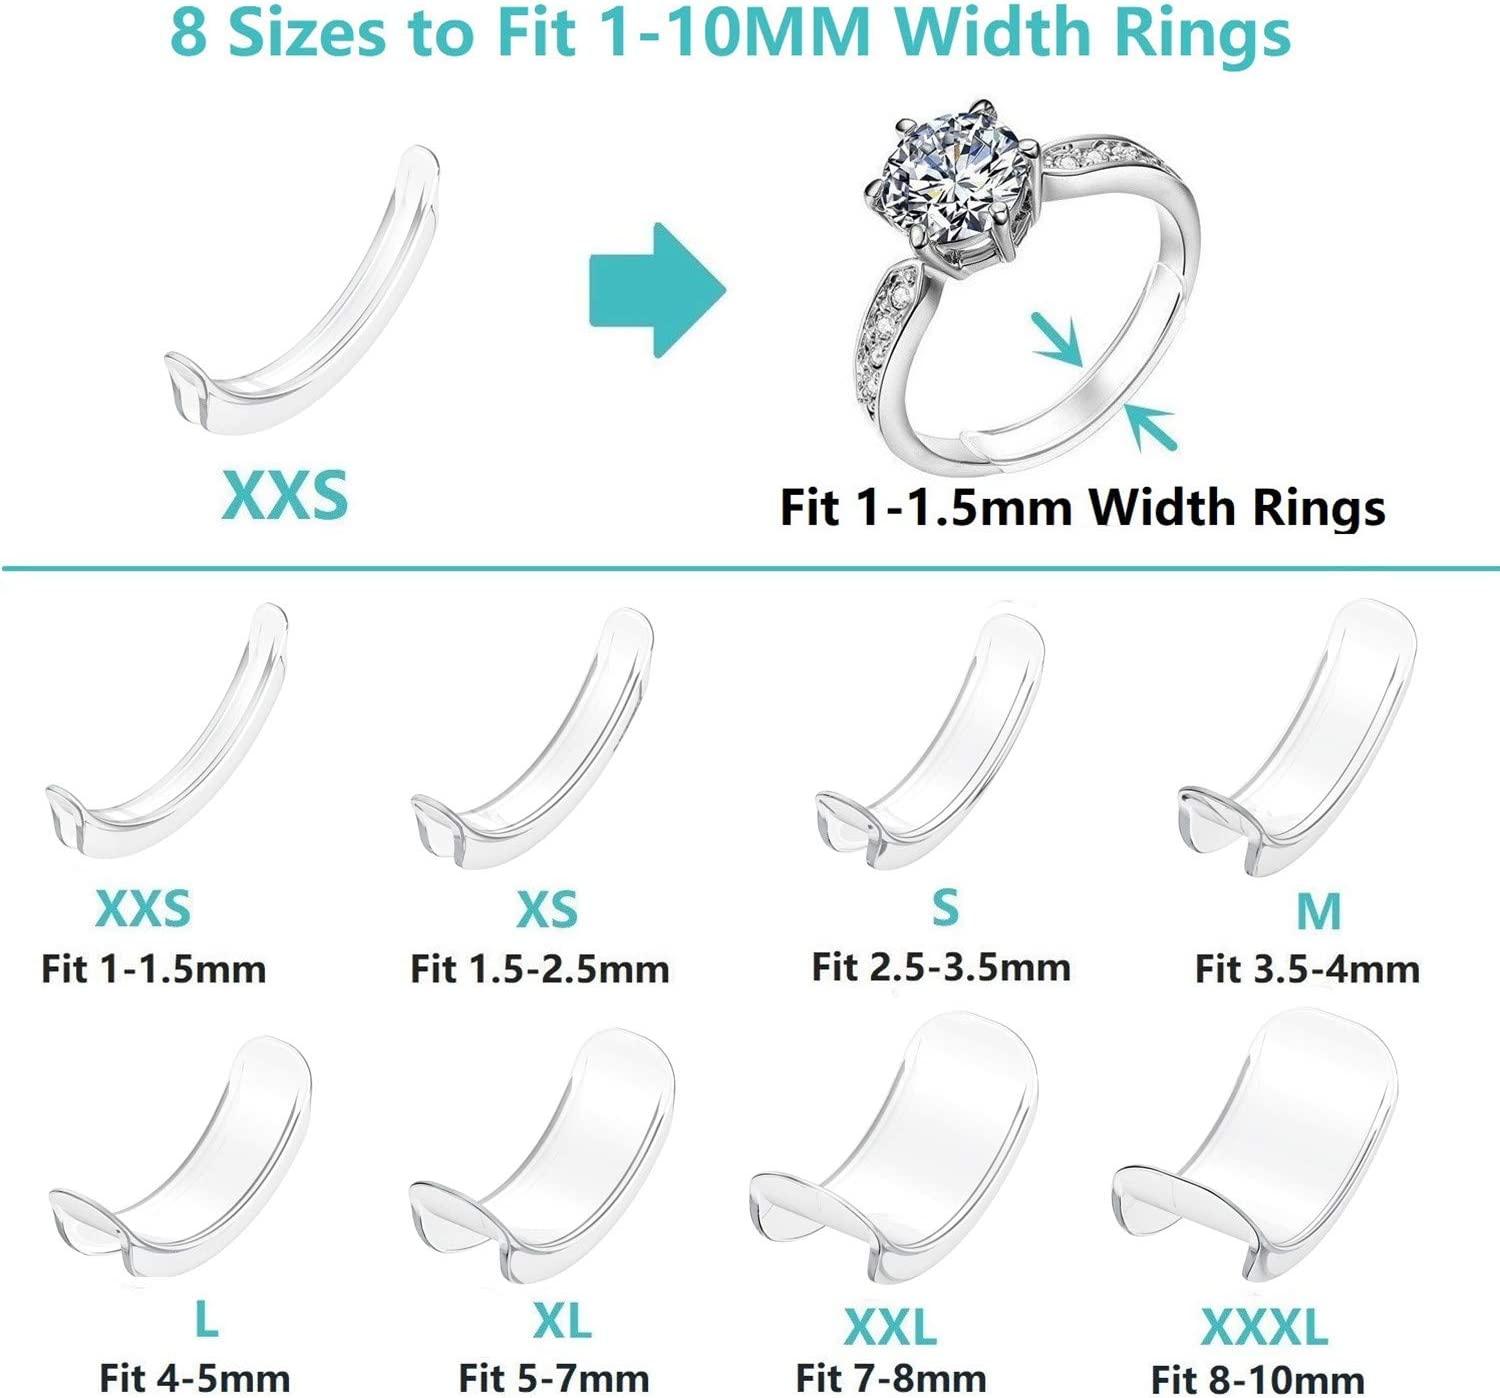 Upgraded Soft Silicone Ring Size Adjuster Loose Rings - Temu Germany